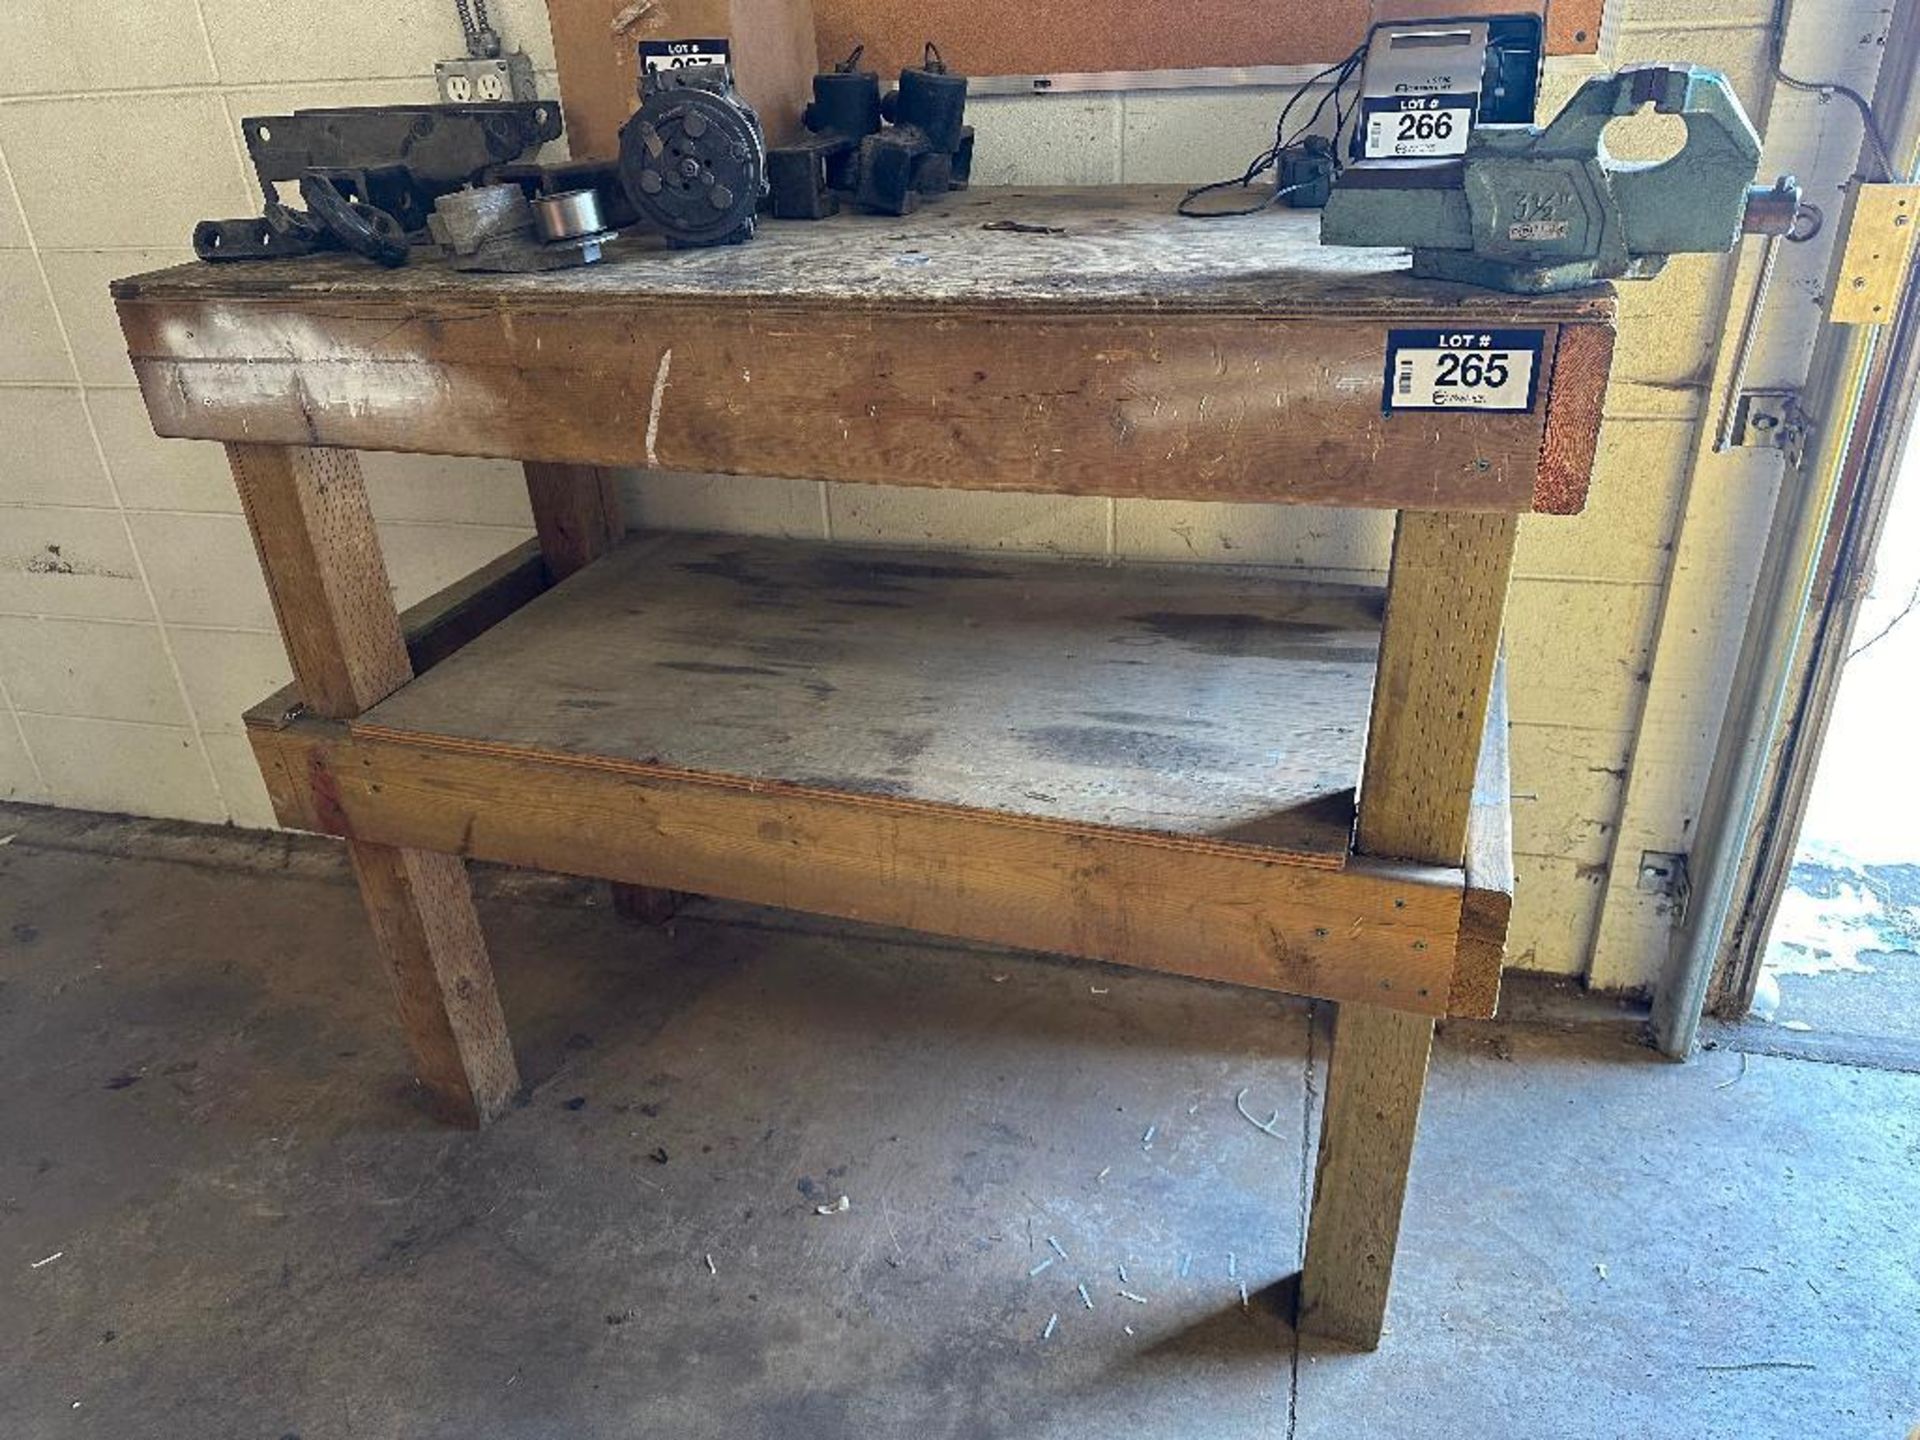 51" X 24" X 43" 2-Tier Work Bench w/ 3.5" Bech Vise - Image 2 of 5